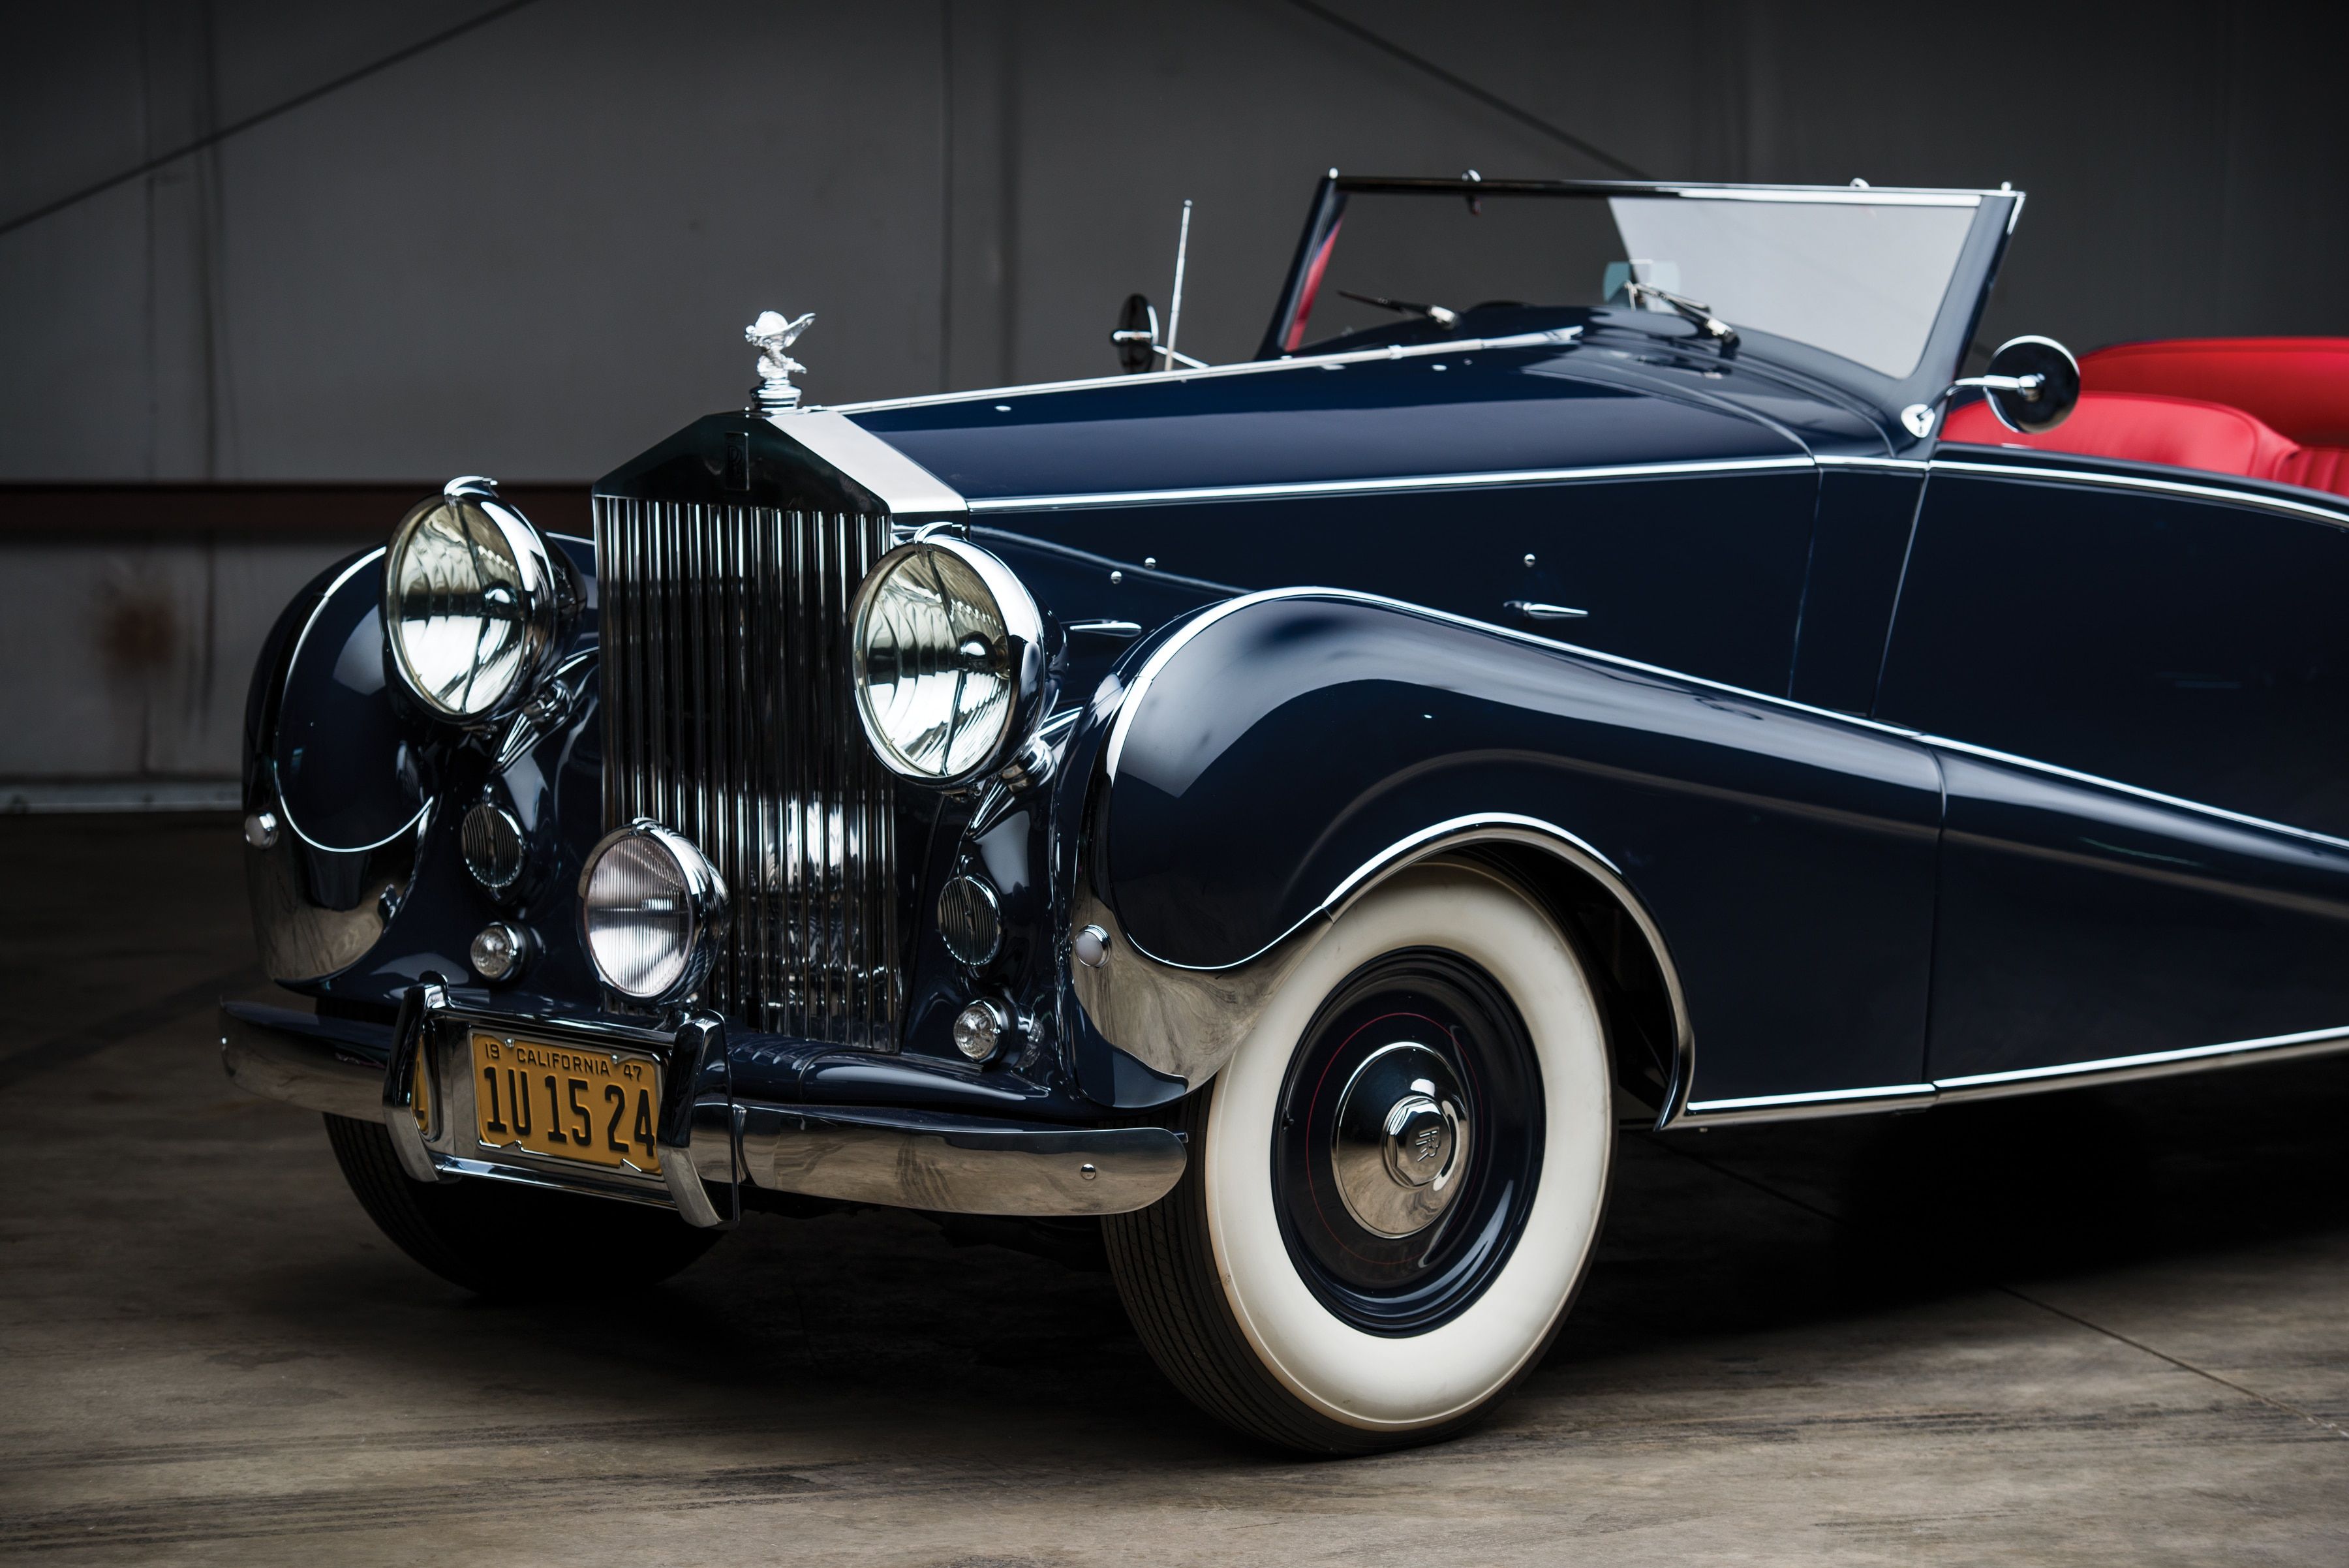 1947 Rolls Royce Silver Wraith auctions for Rs. 1.7 cr. at India’s first online classic car auction